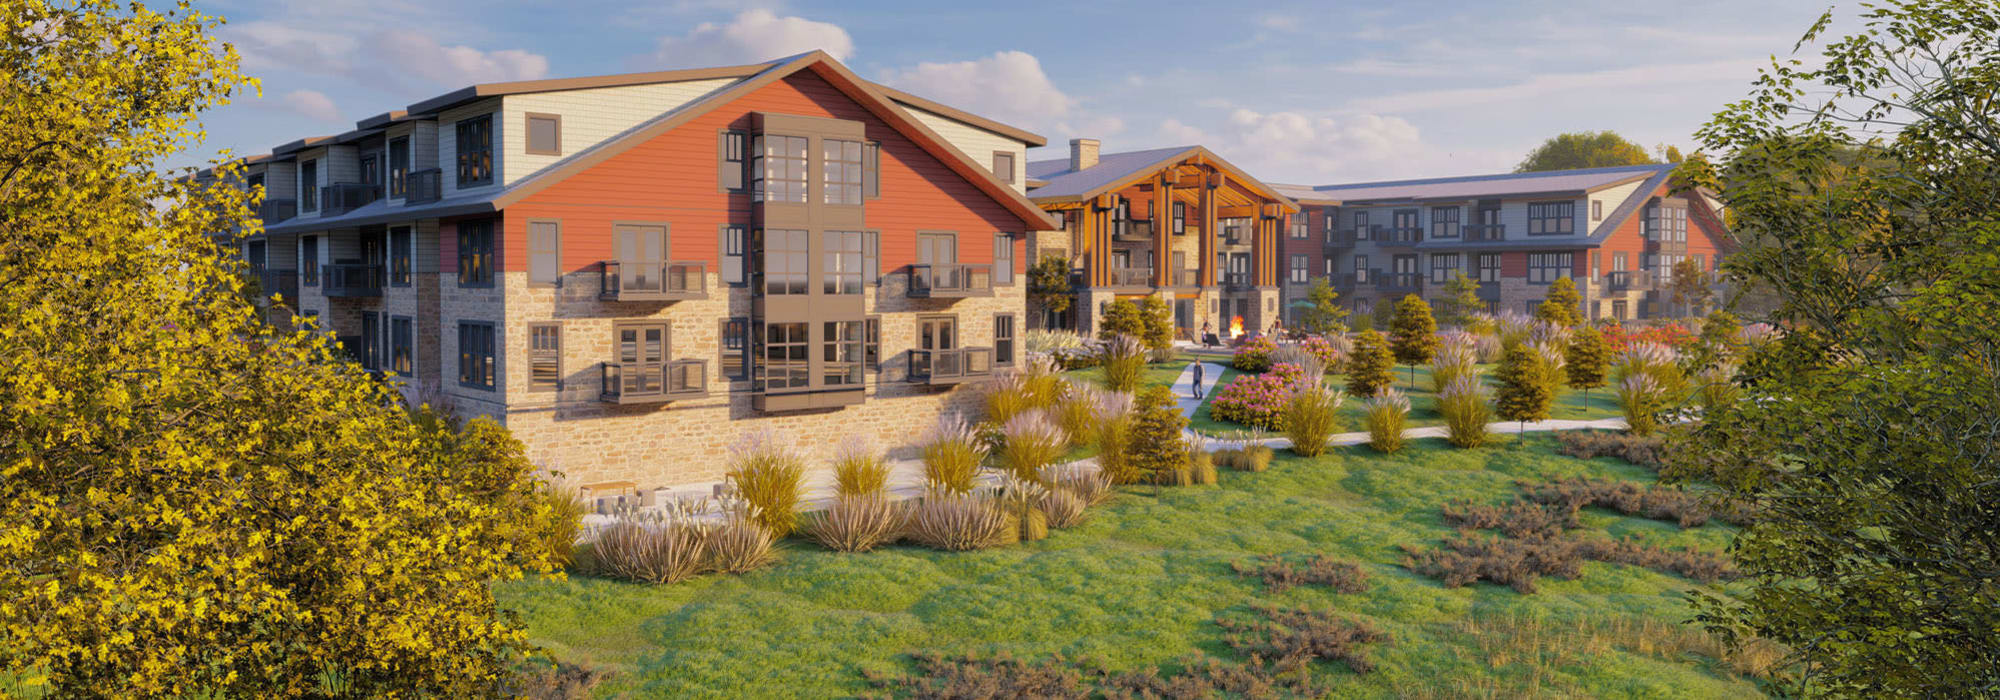 Exterior and entrance  at Sandhill Shores in Stillwater, Minnesota